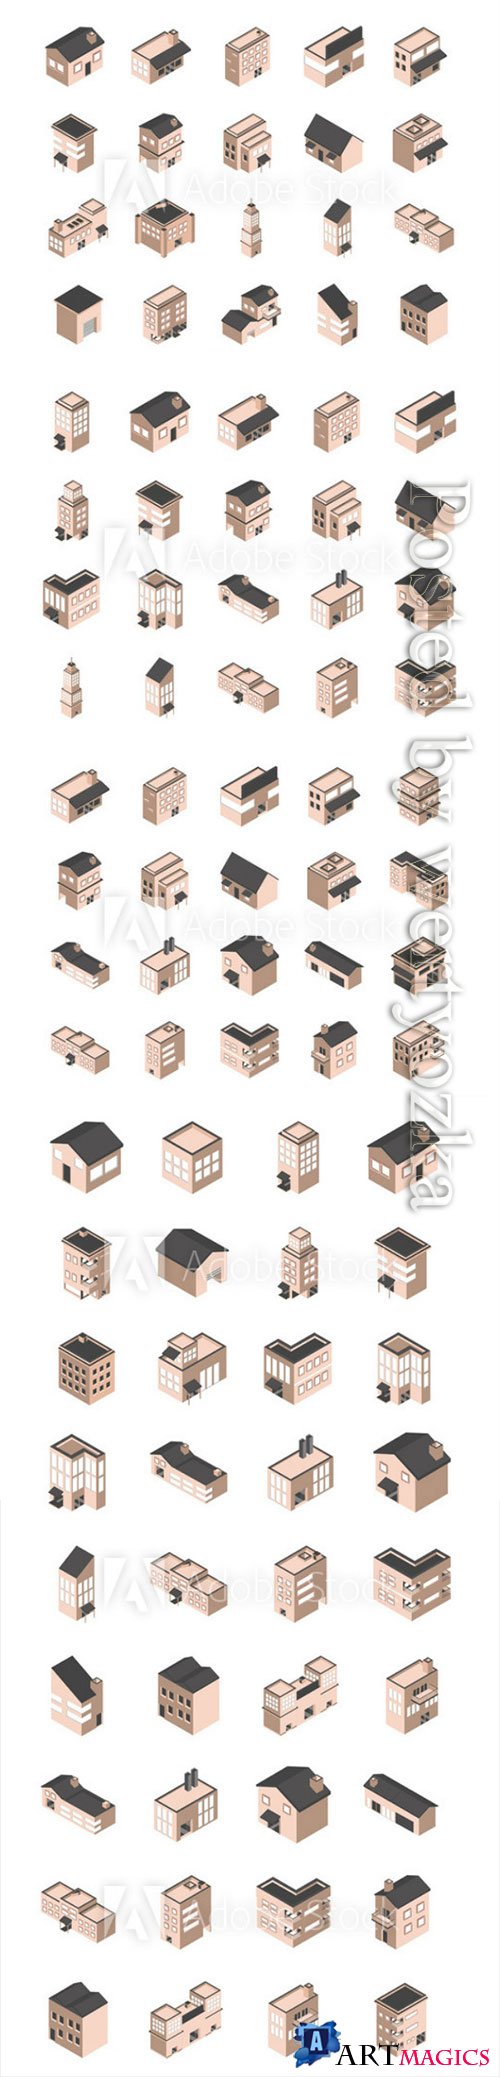 Building isometric style icons vector set